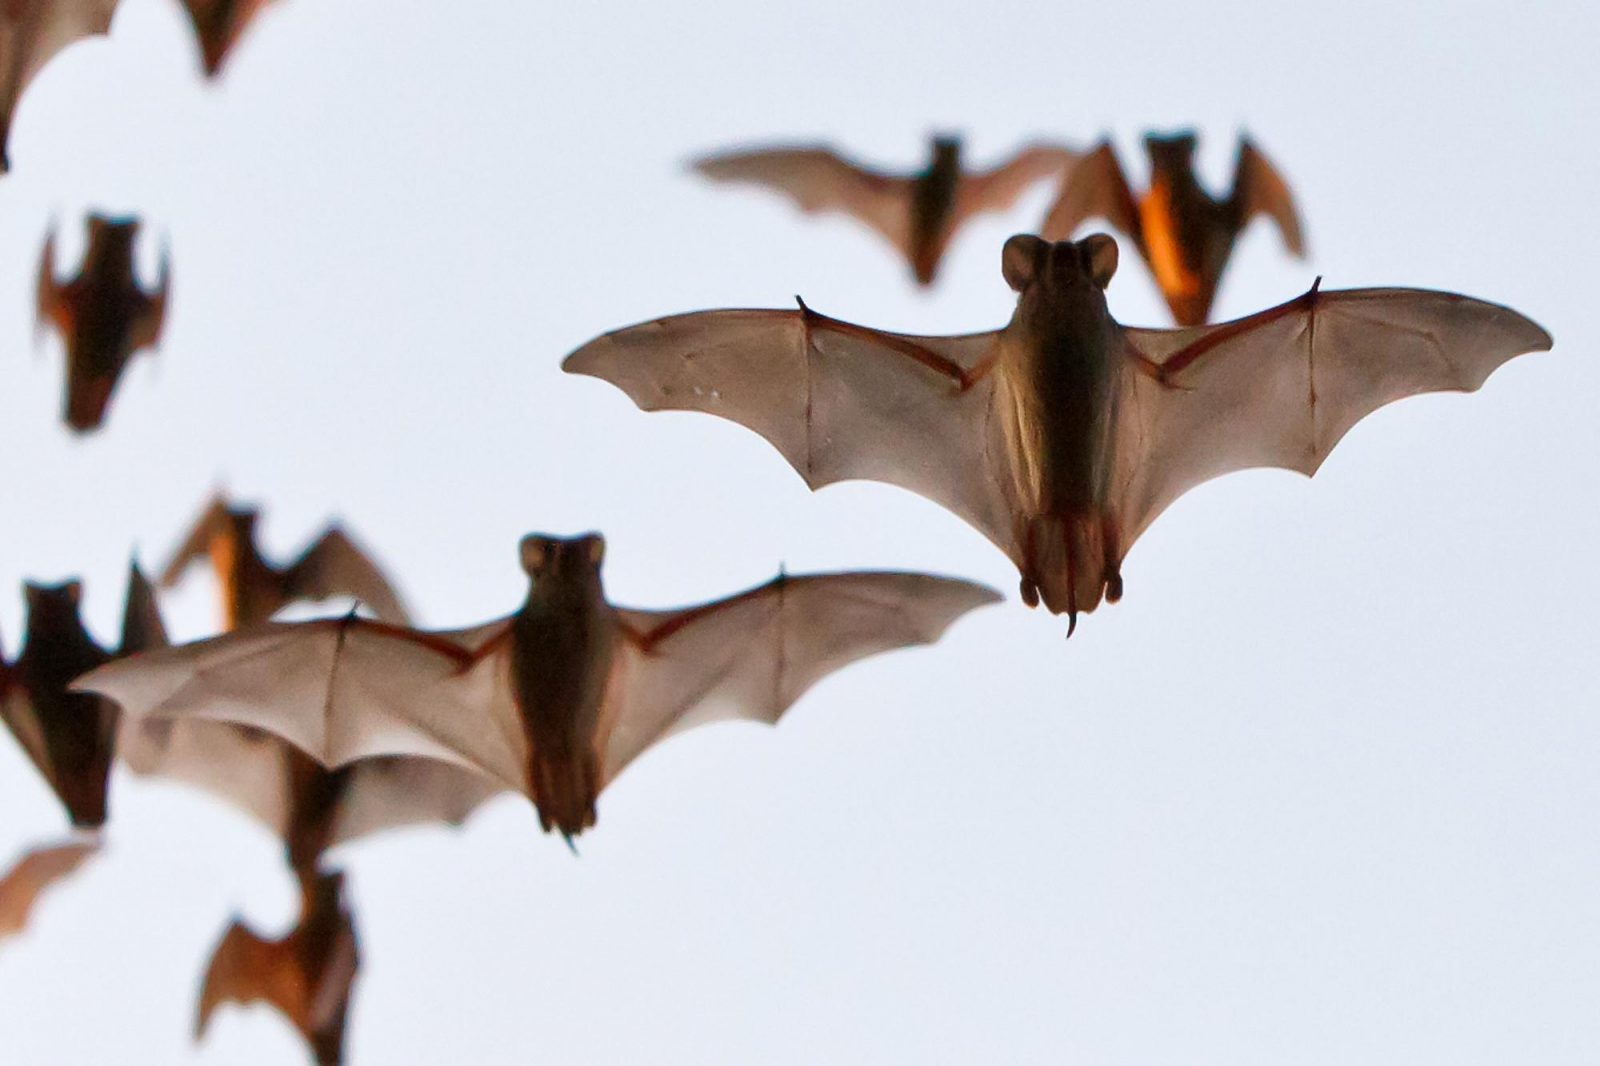 This Animal Quiz Might Not Be Hardest 1 You've Ever Taken, But It Certainly Isn't Easy Mexican free-tailed bat